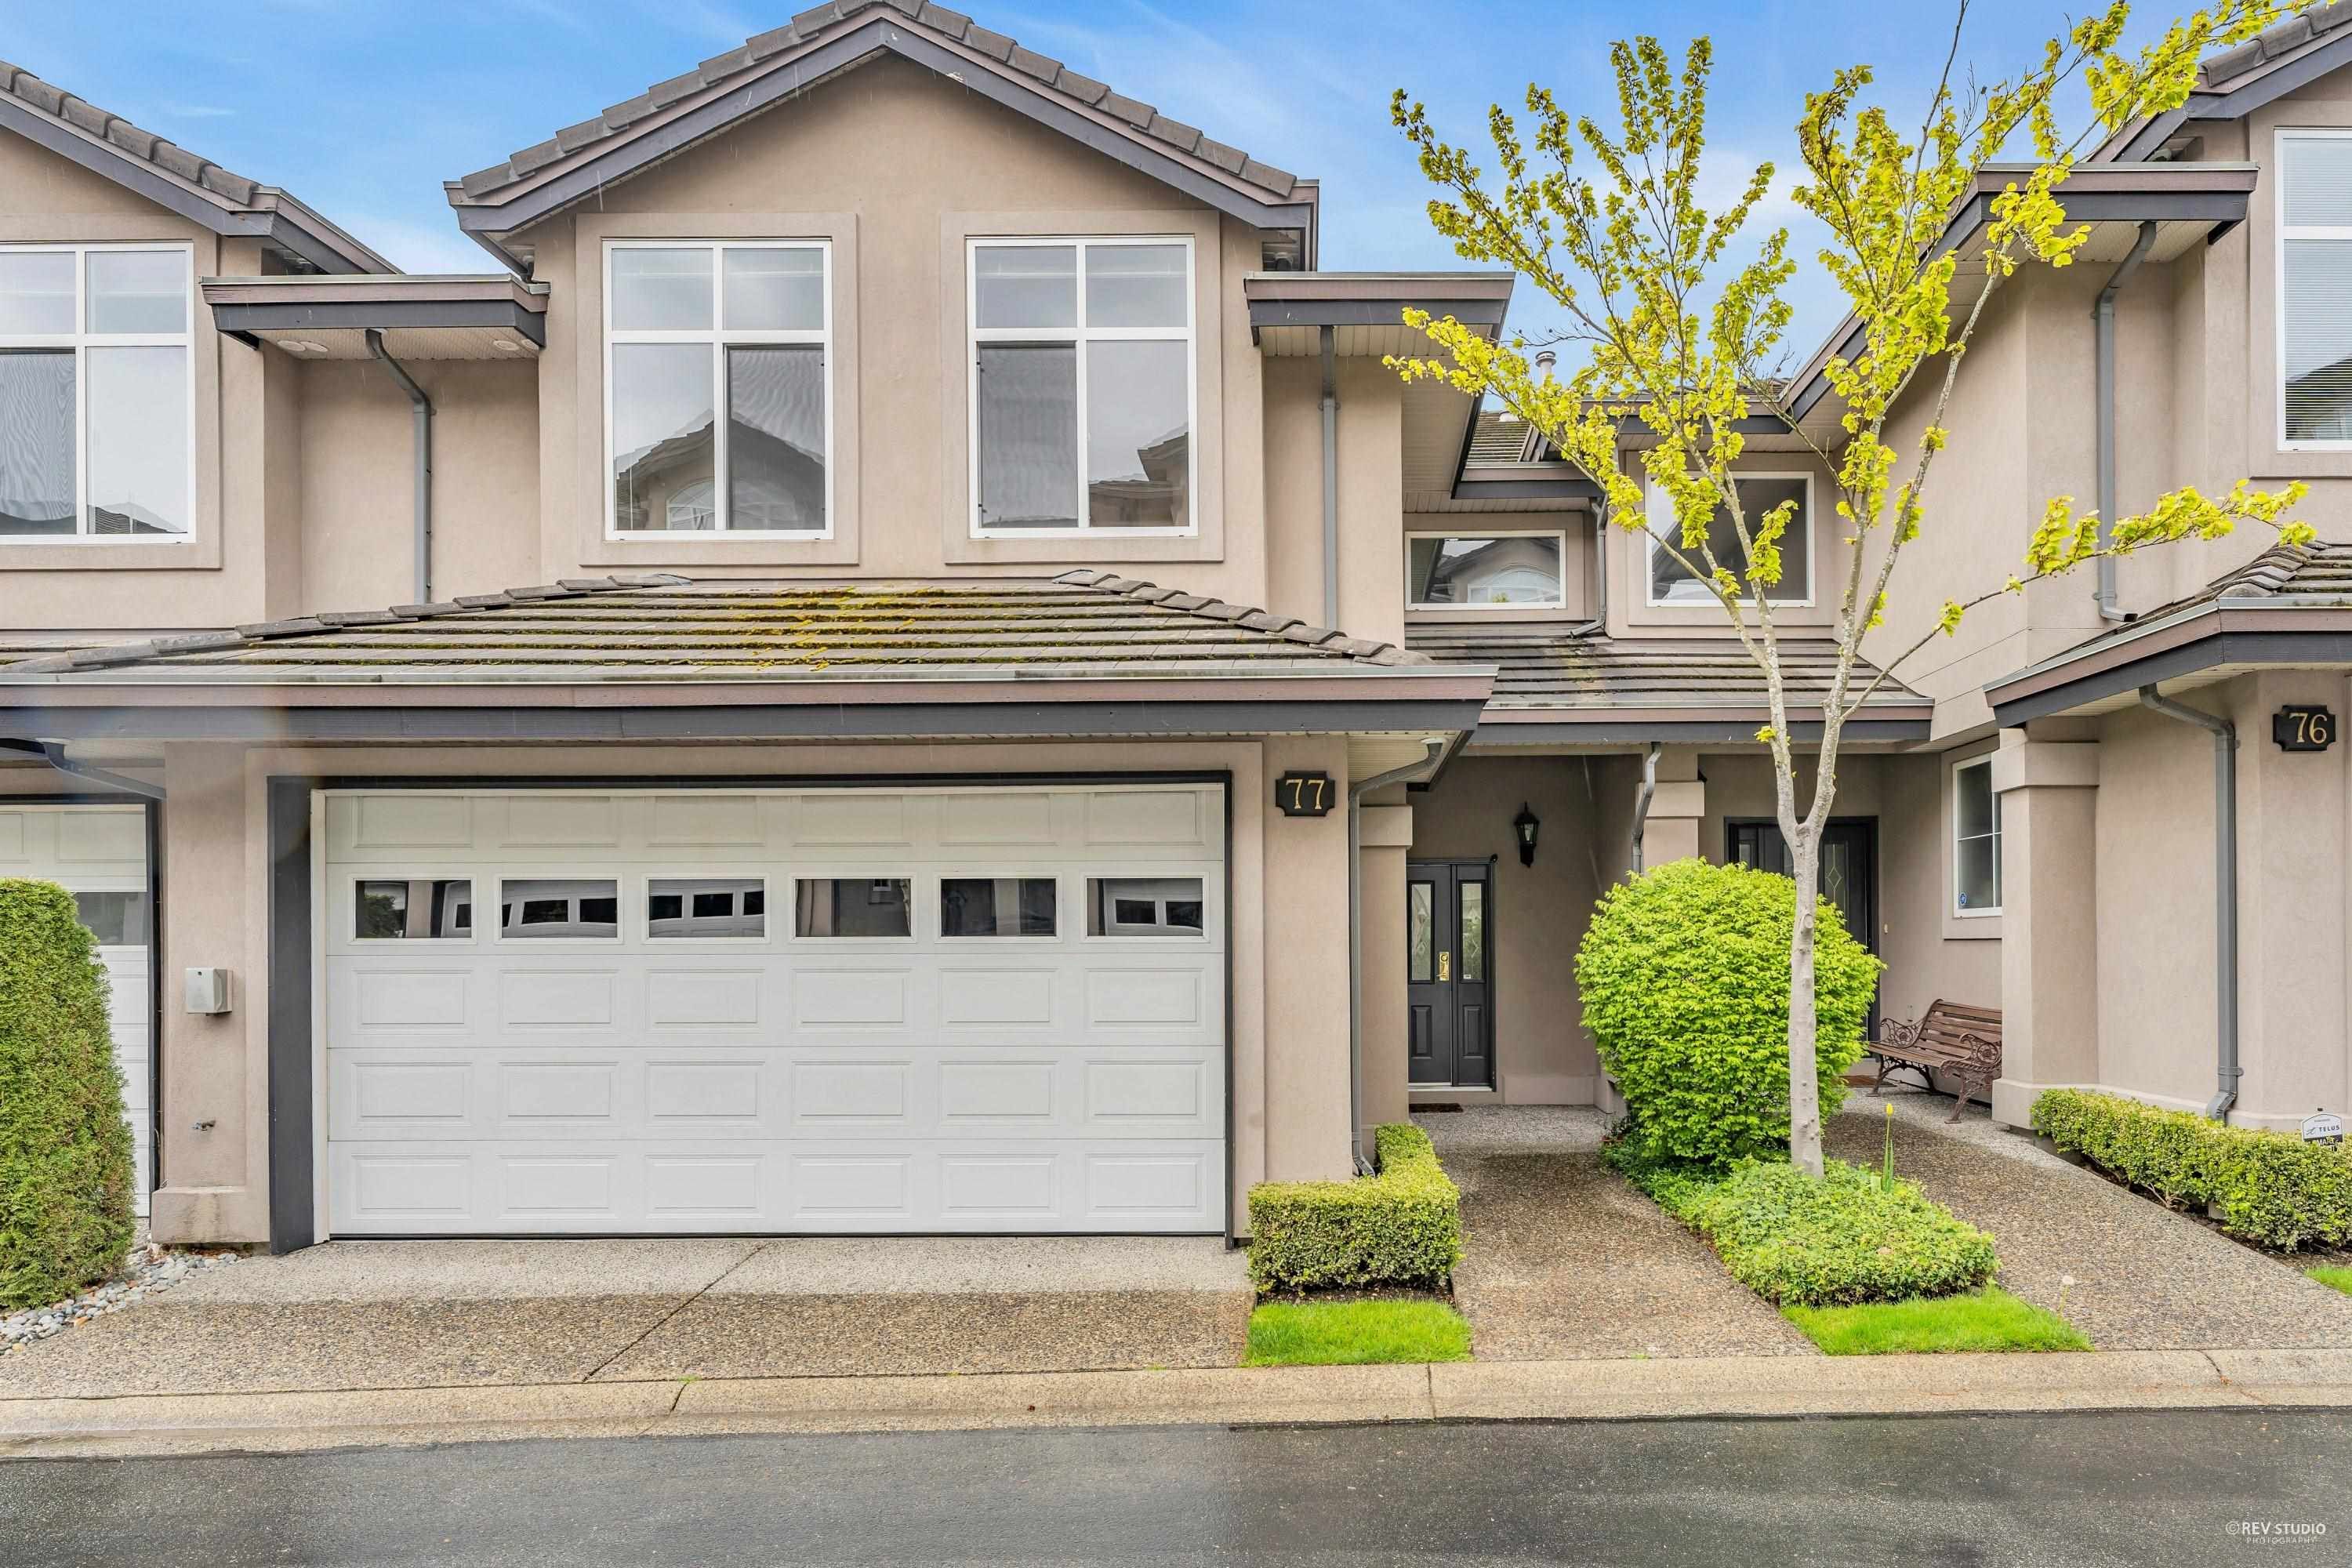 This property has sold: 77 678 CITADEL DR in Port Coquitlam